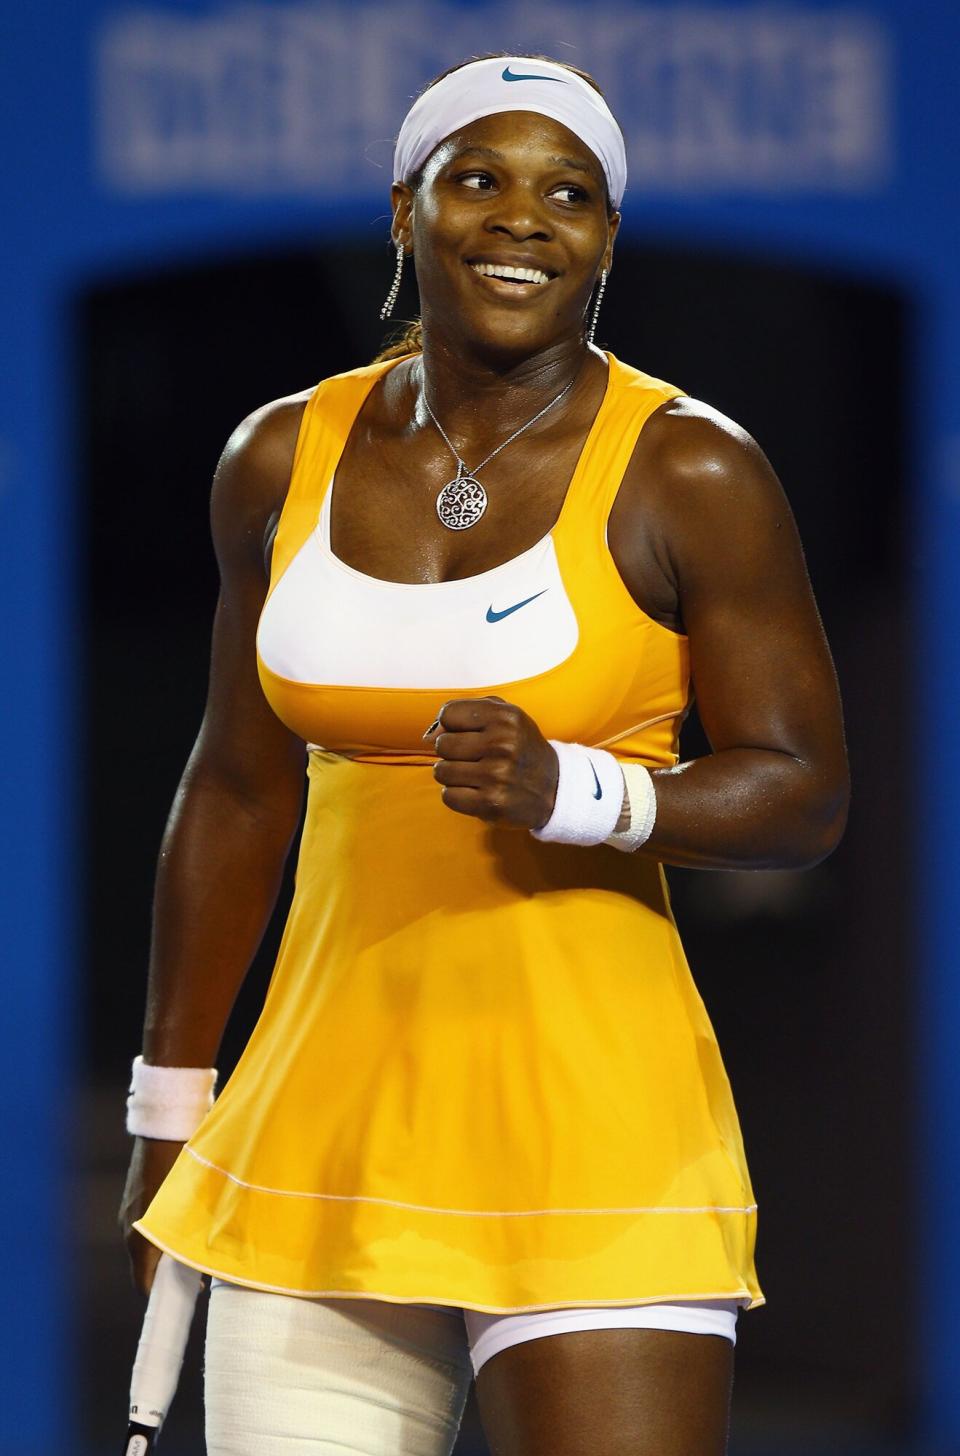 Serena Williams of the United States of America celebrates winning a point in her women's final match against Justine Henin of Belgium during day thirteen of the 2010 Australian Open at Melbourne Park on January 30, 2010 in Melbourne, Australia